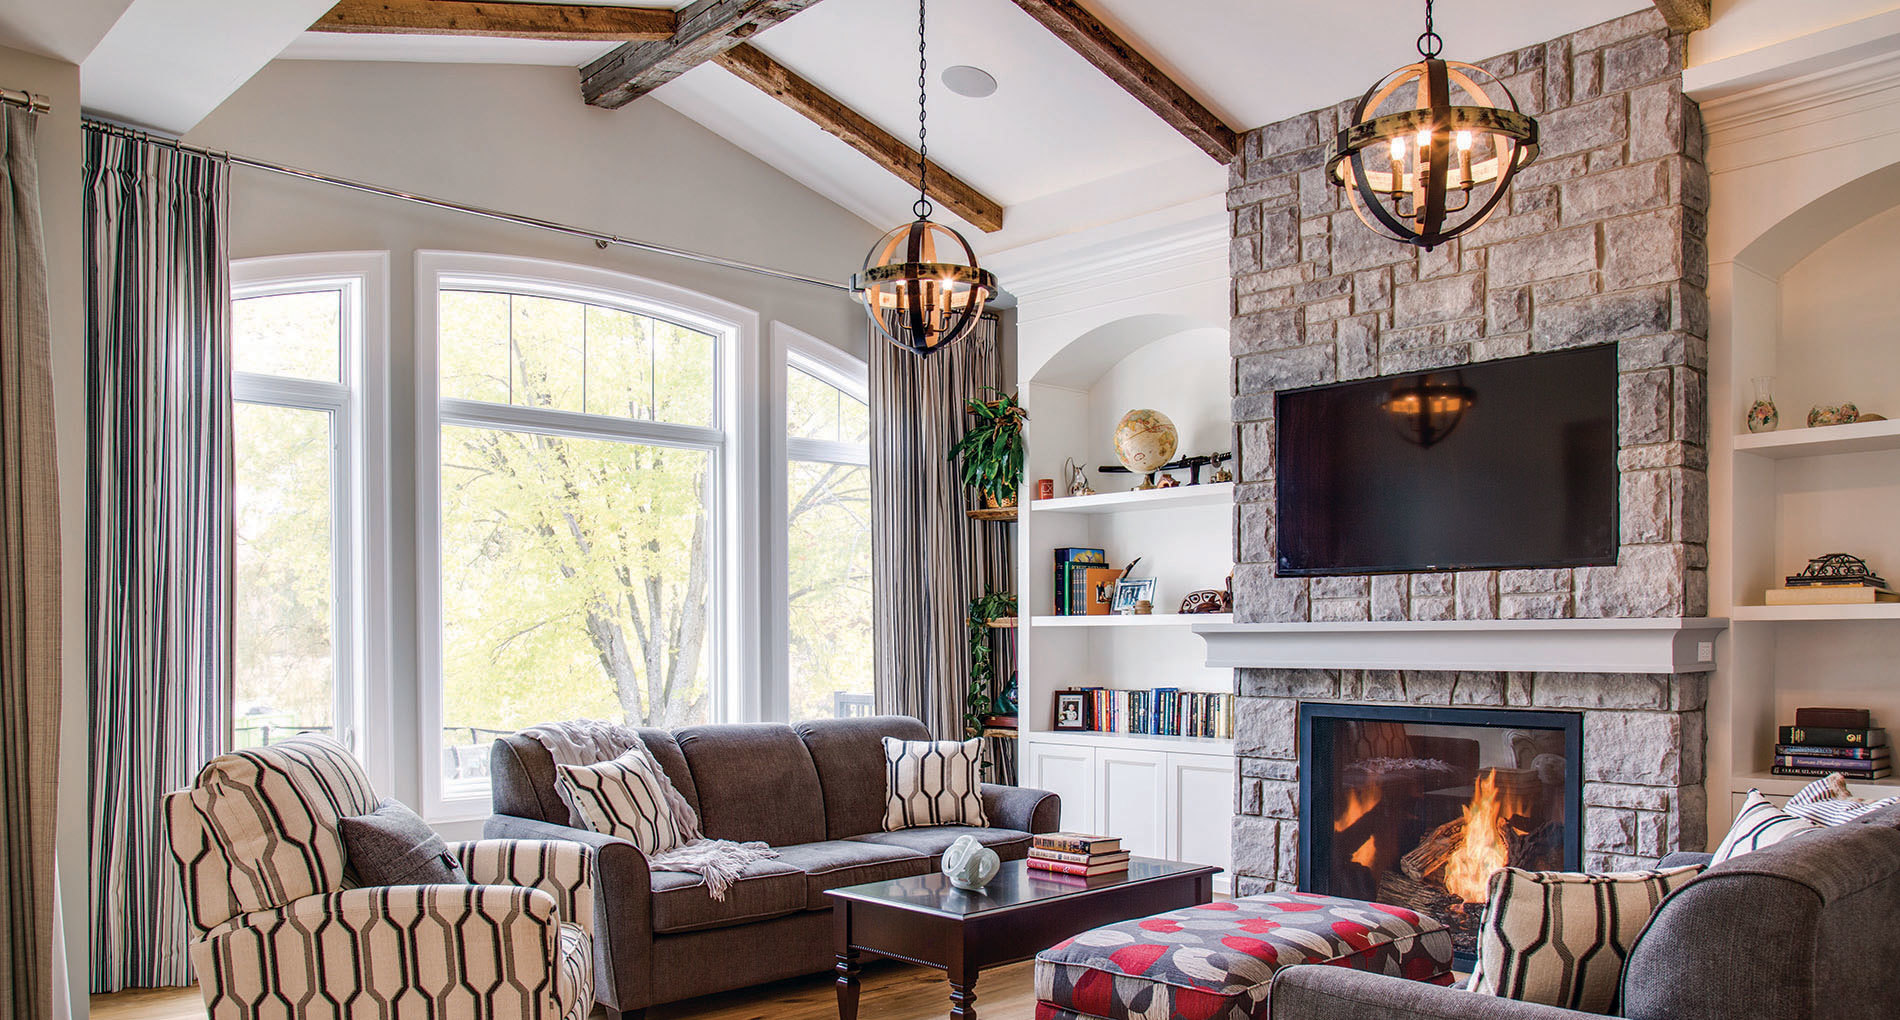 cozy living space with large window on one wall and stone fireplace and built in shelves on the other